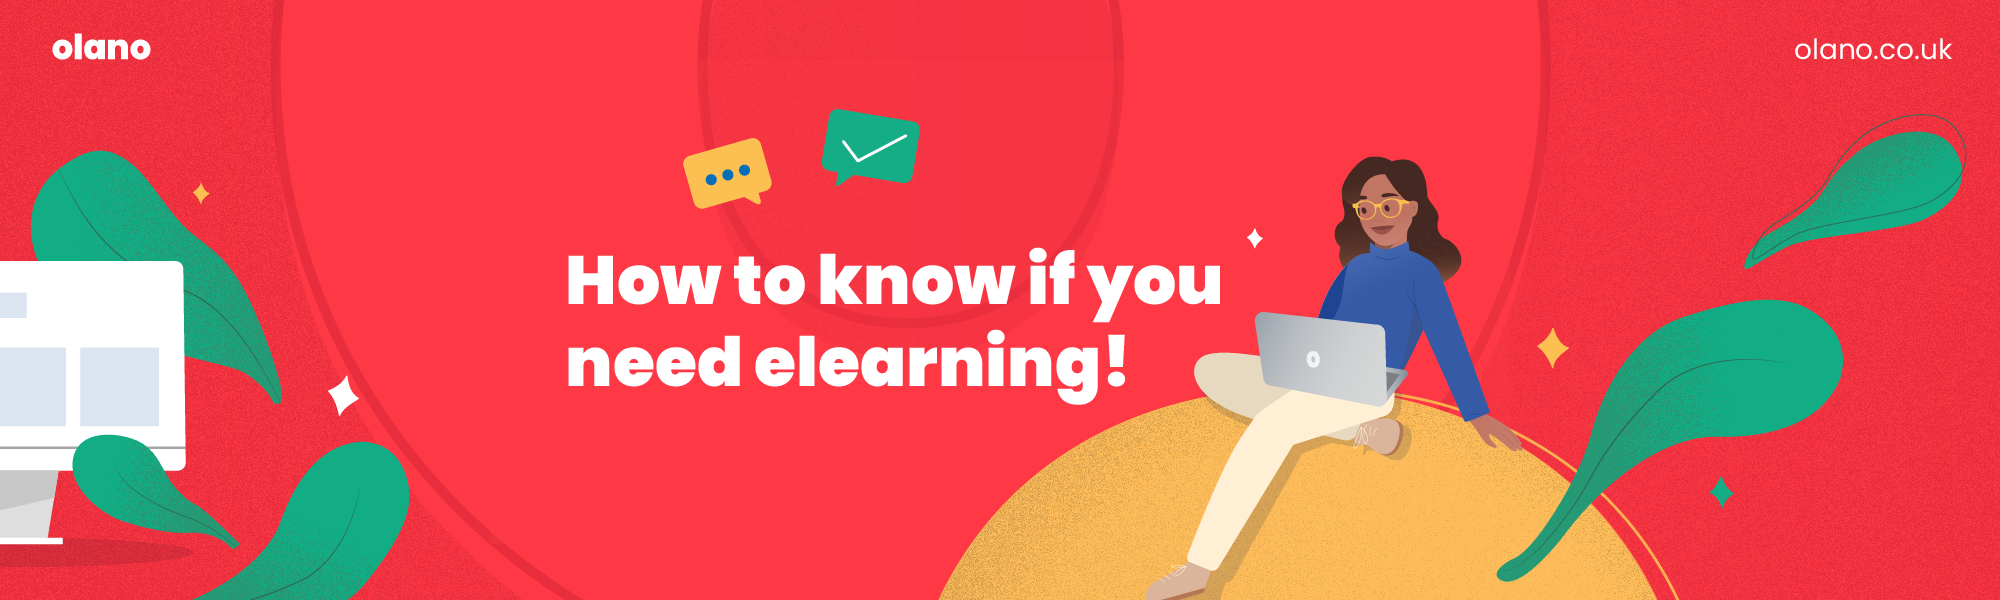 do you need eLearning